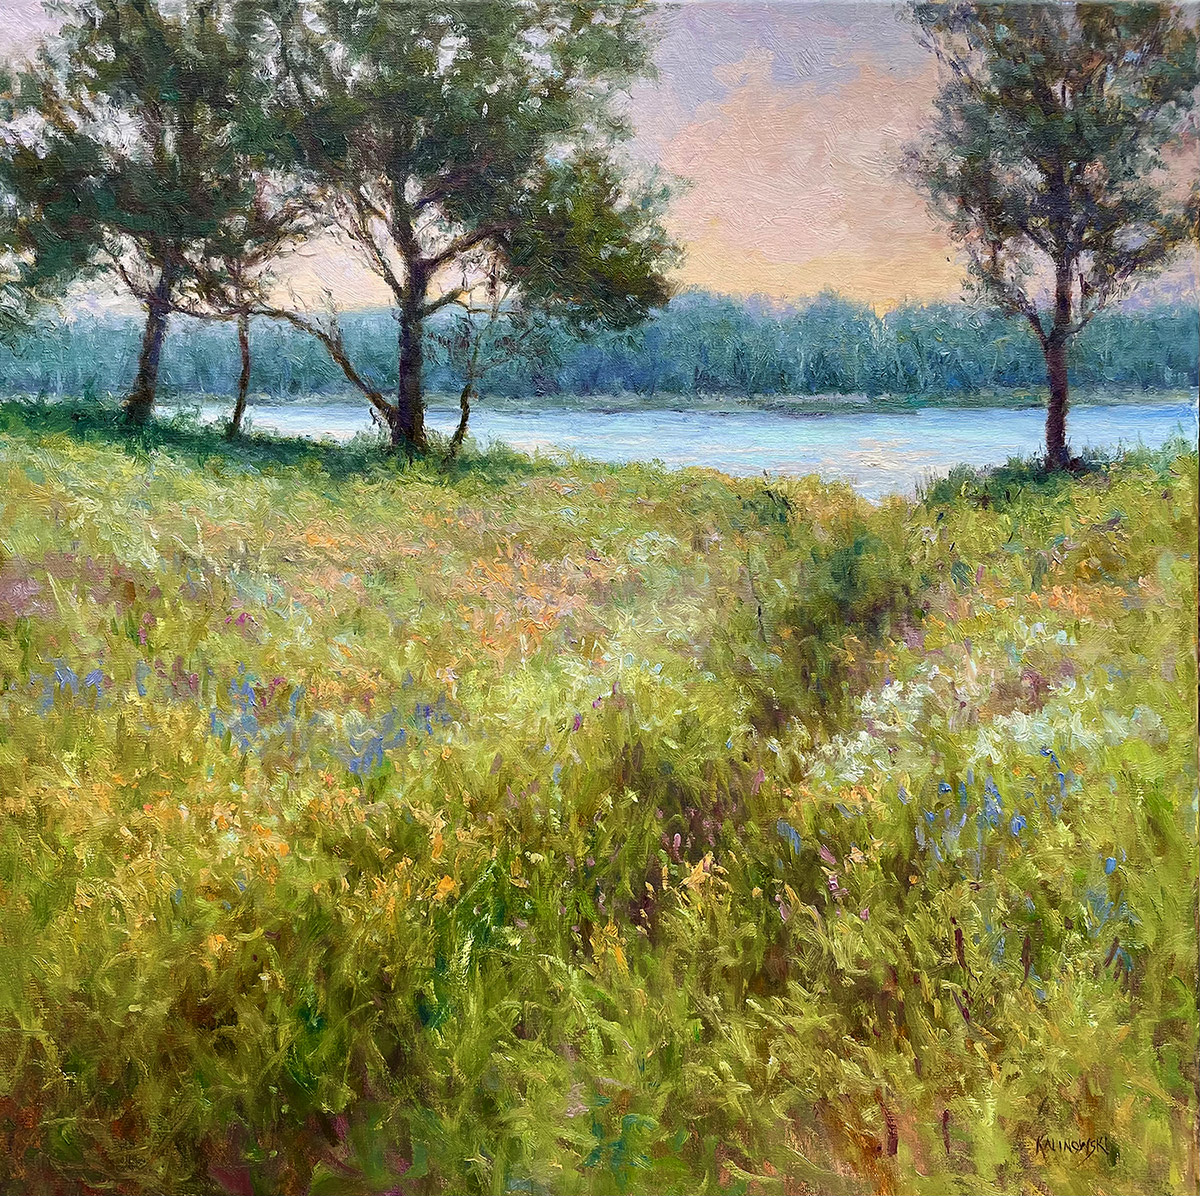 oil painting of field with trees framing the canvas; water in distance